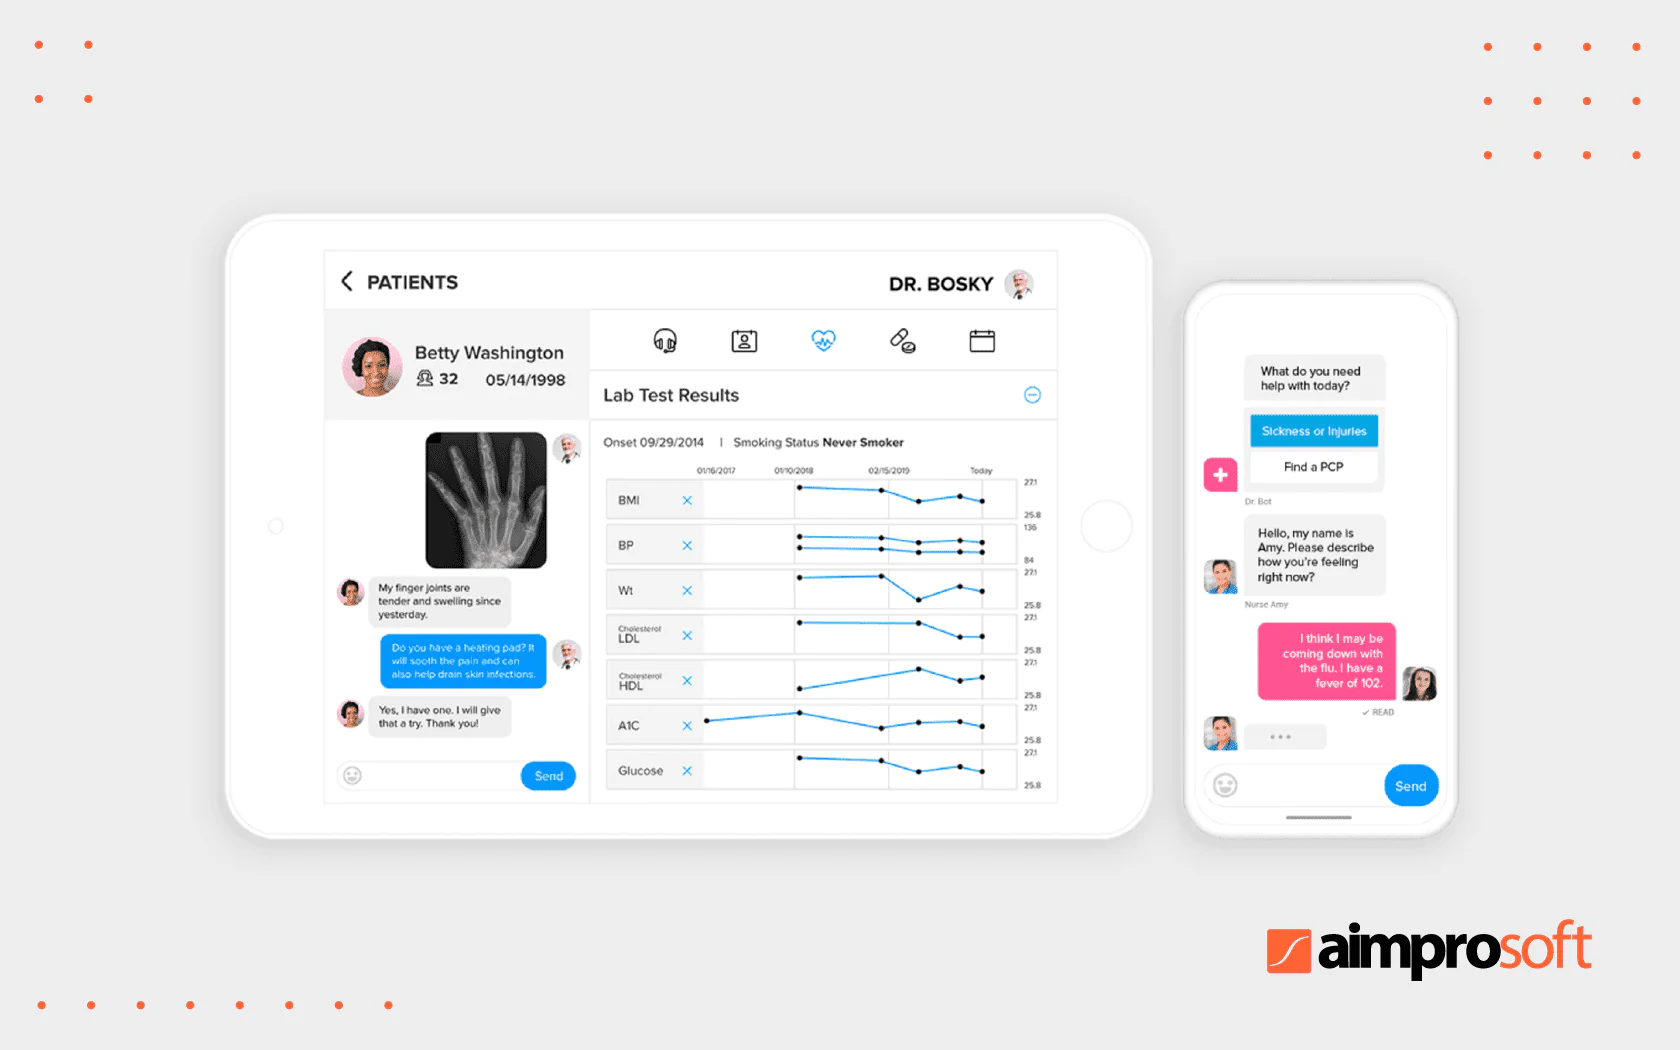 PubNub is a real-time in-app chat and communication platform for messaging and video conferencing